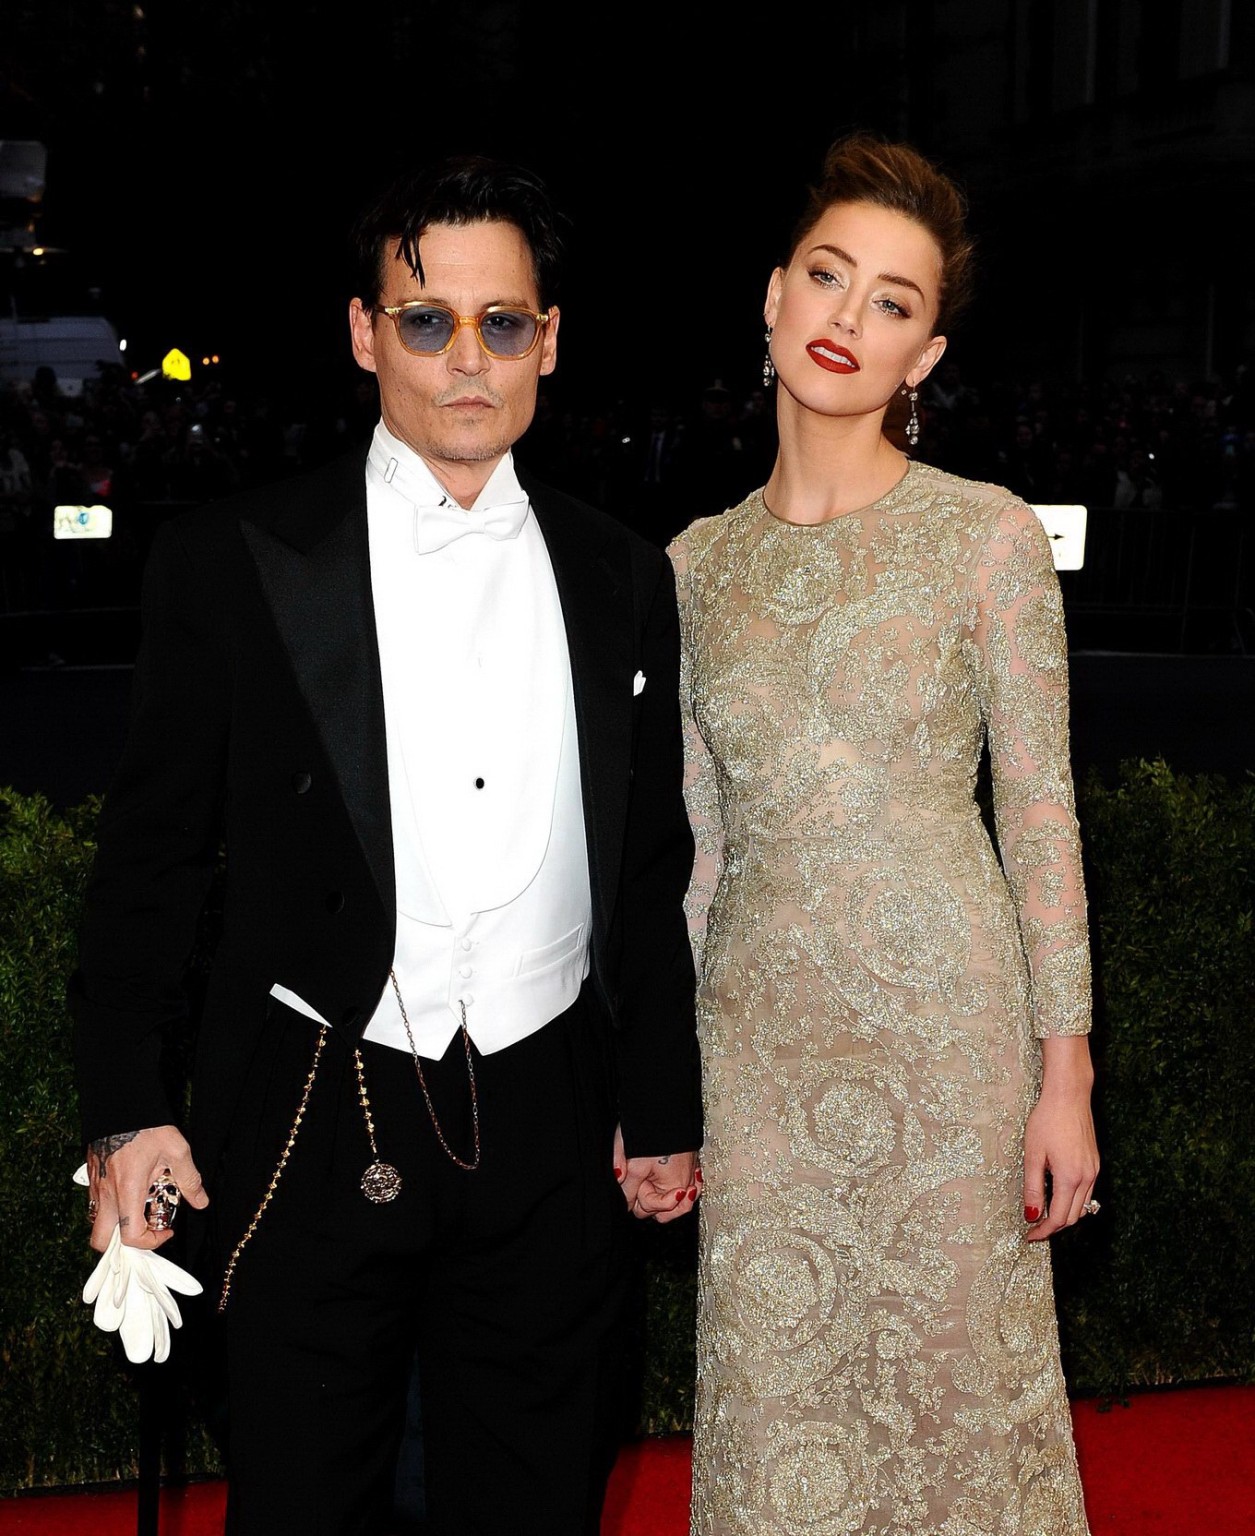 Amber Heard braless wearing a see through dress at the 2014 Met Gala in NY #75197522